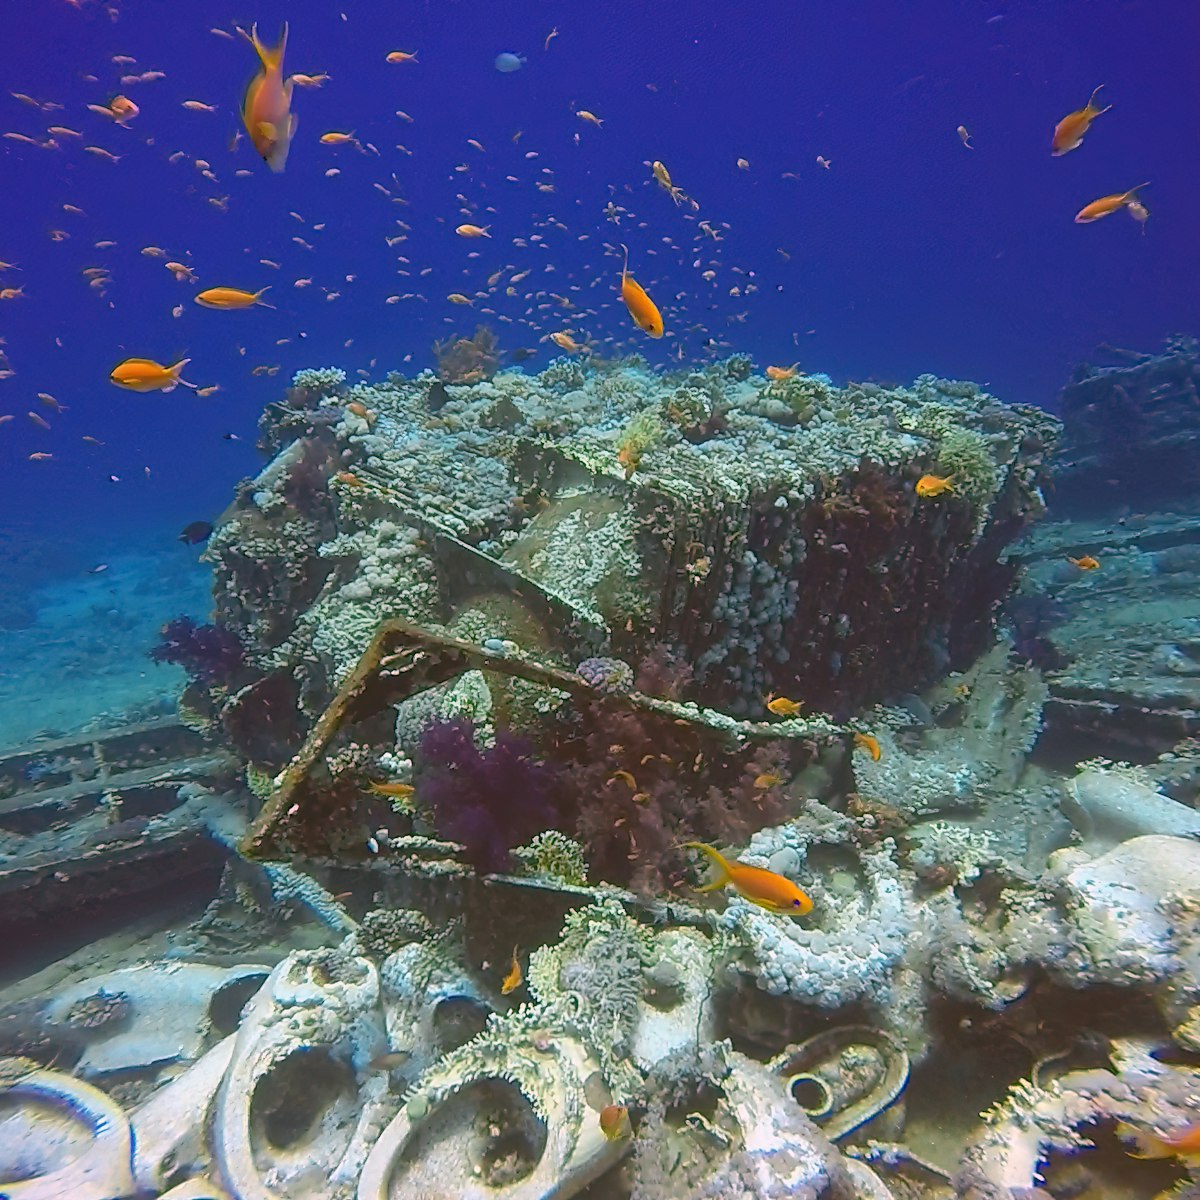 Cargo from the wreck of the Yolanda at the tip of the Sinai Peninsula in Egypt.